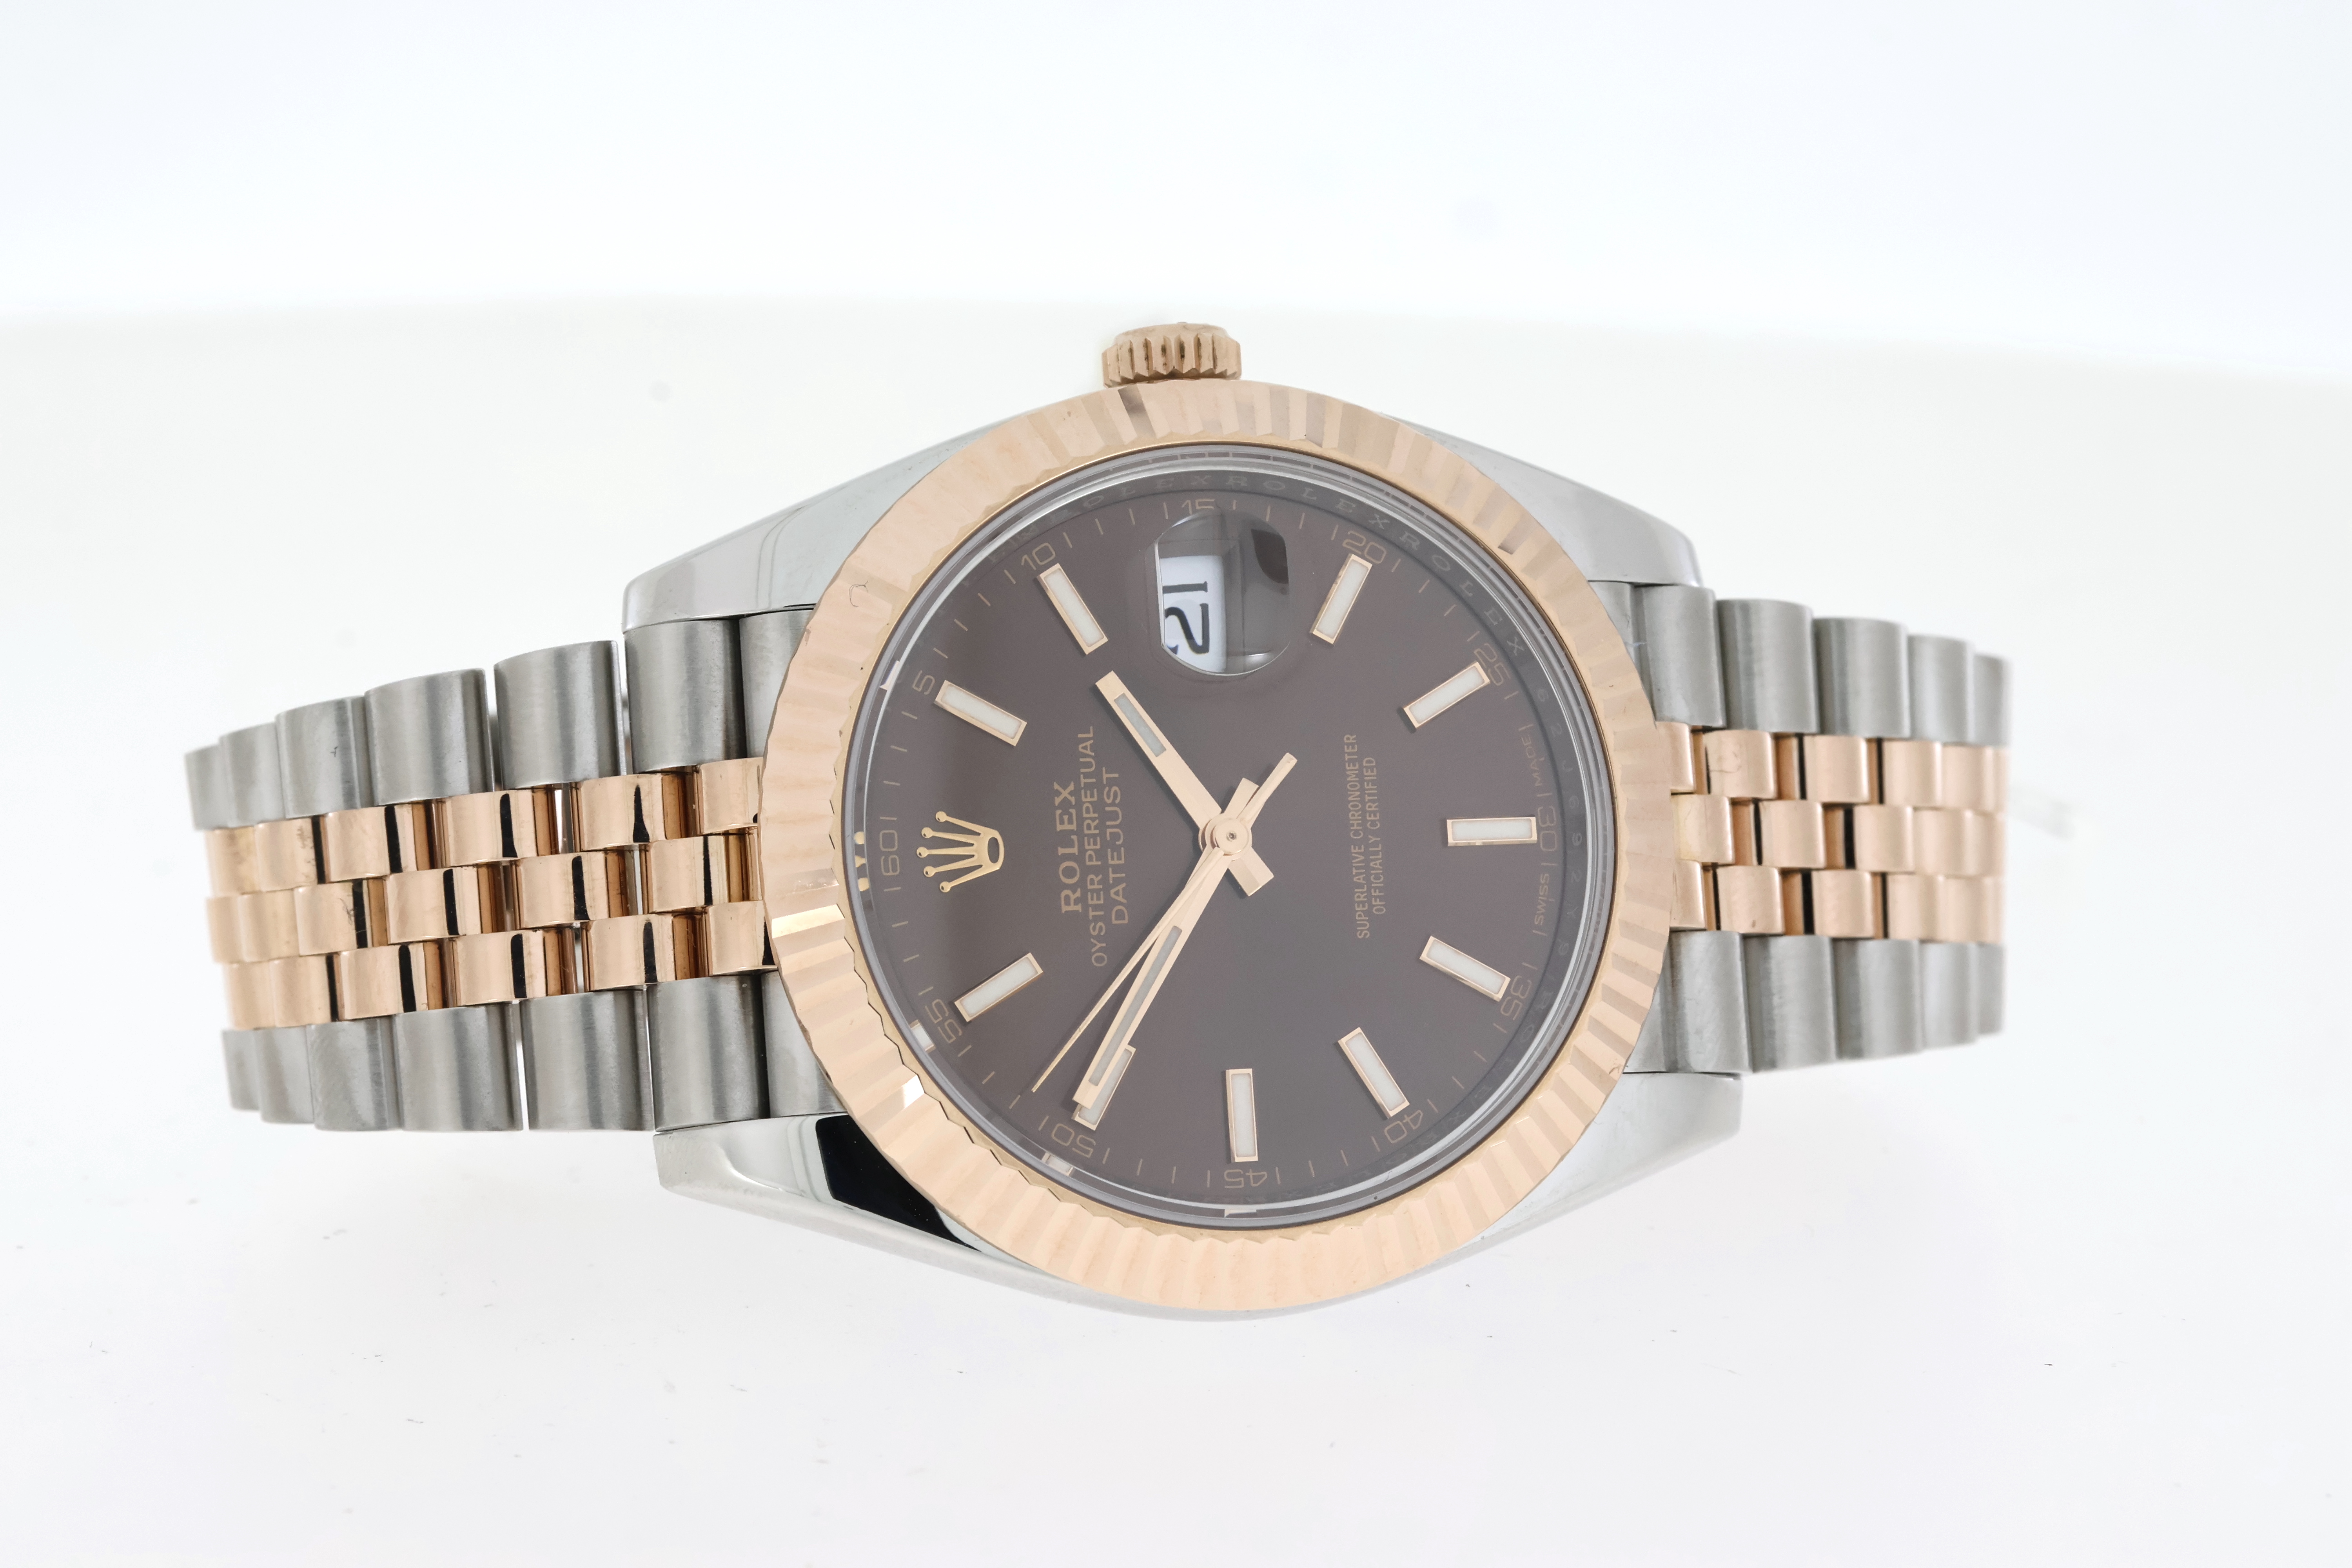 Rolex Datejust 41 Steel and Gold Automatic Reference 126331 with Box - Image 2 of 6